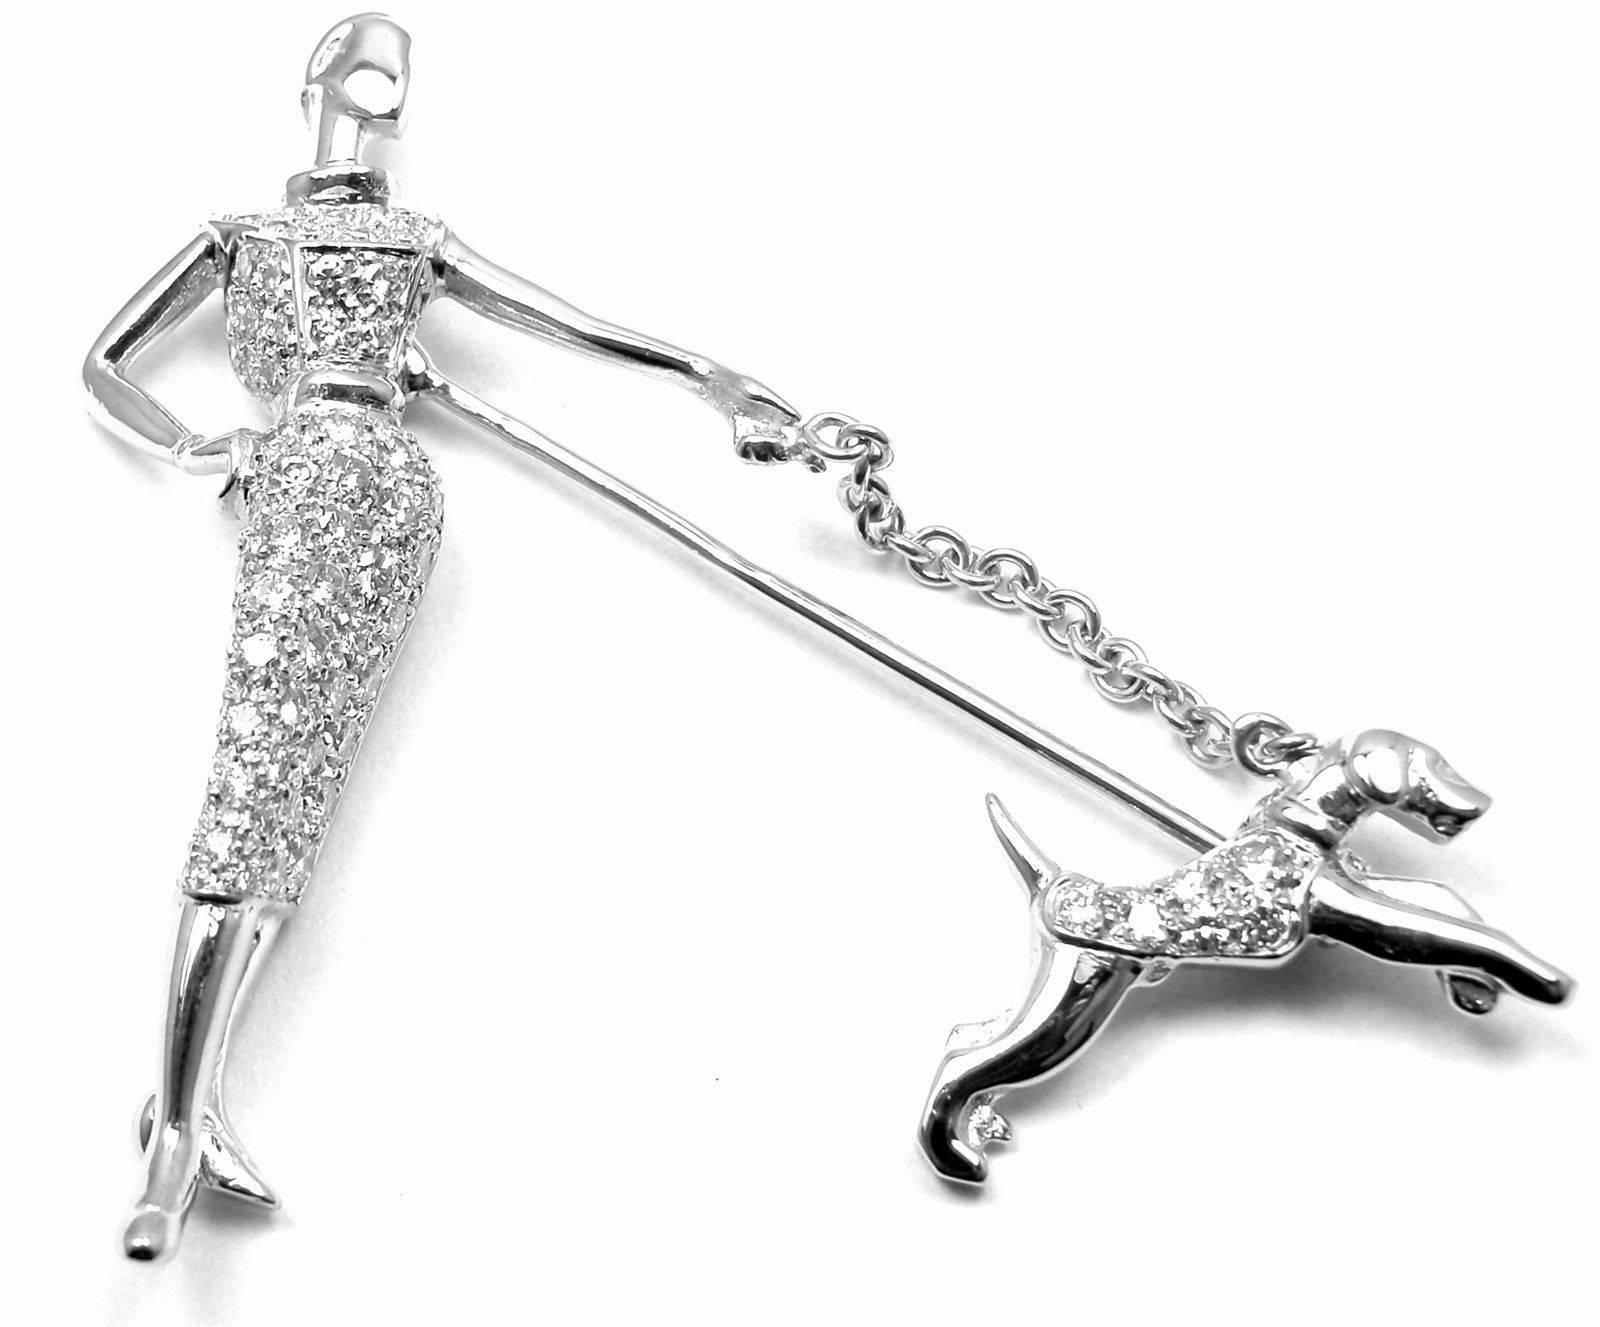 Absolutely Stunning & Gorgeous! Platinum Diamond Lady Walking a Dog Brooch Pin by Van Cleef & Arpels. 
With 68 round brilliant cut diamonds VVS1 clarity, E color total weight approx. 1ct. 
This rare VCA brooch comes with Van Cleef & Arpels service